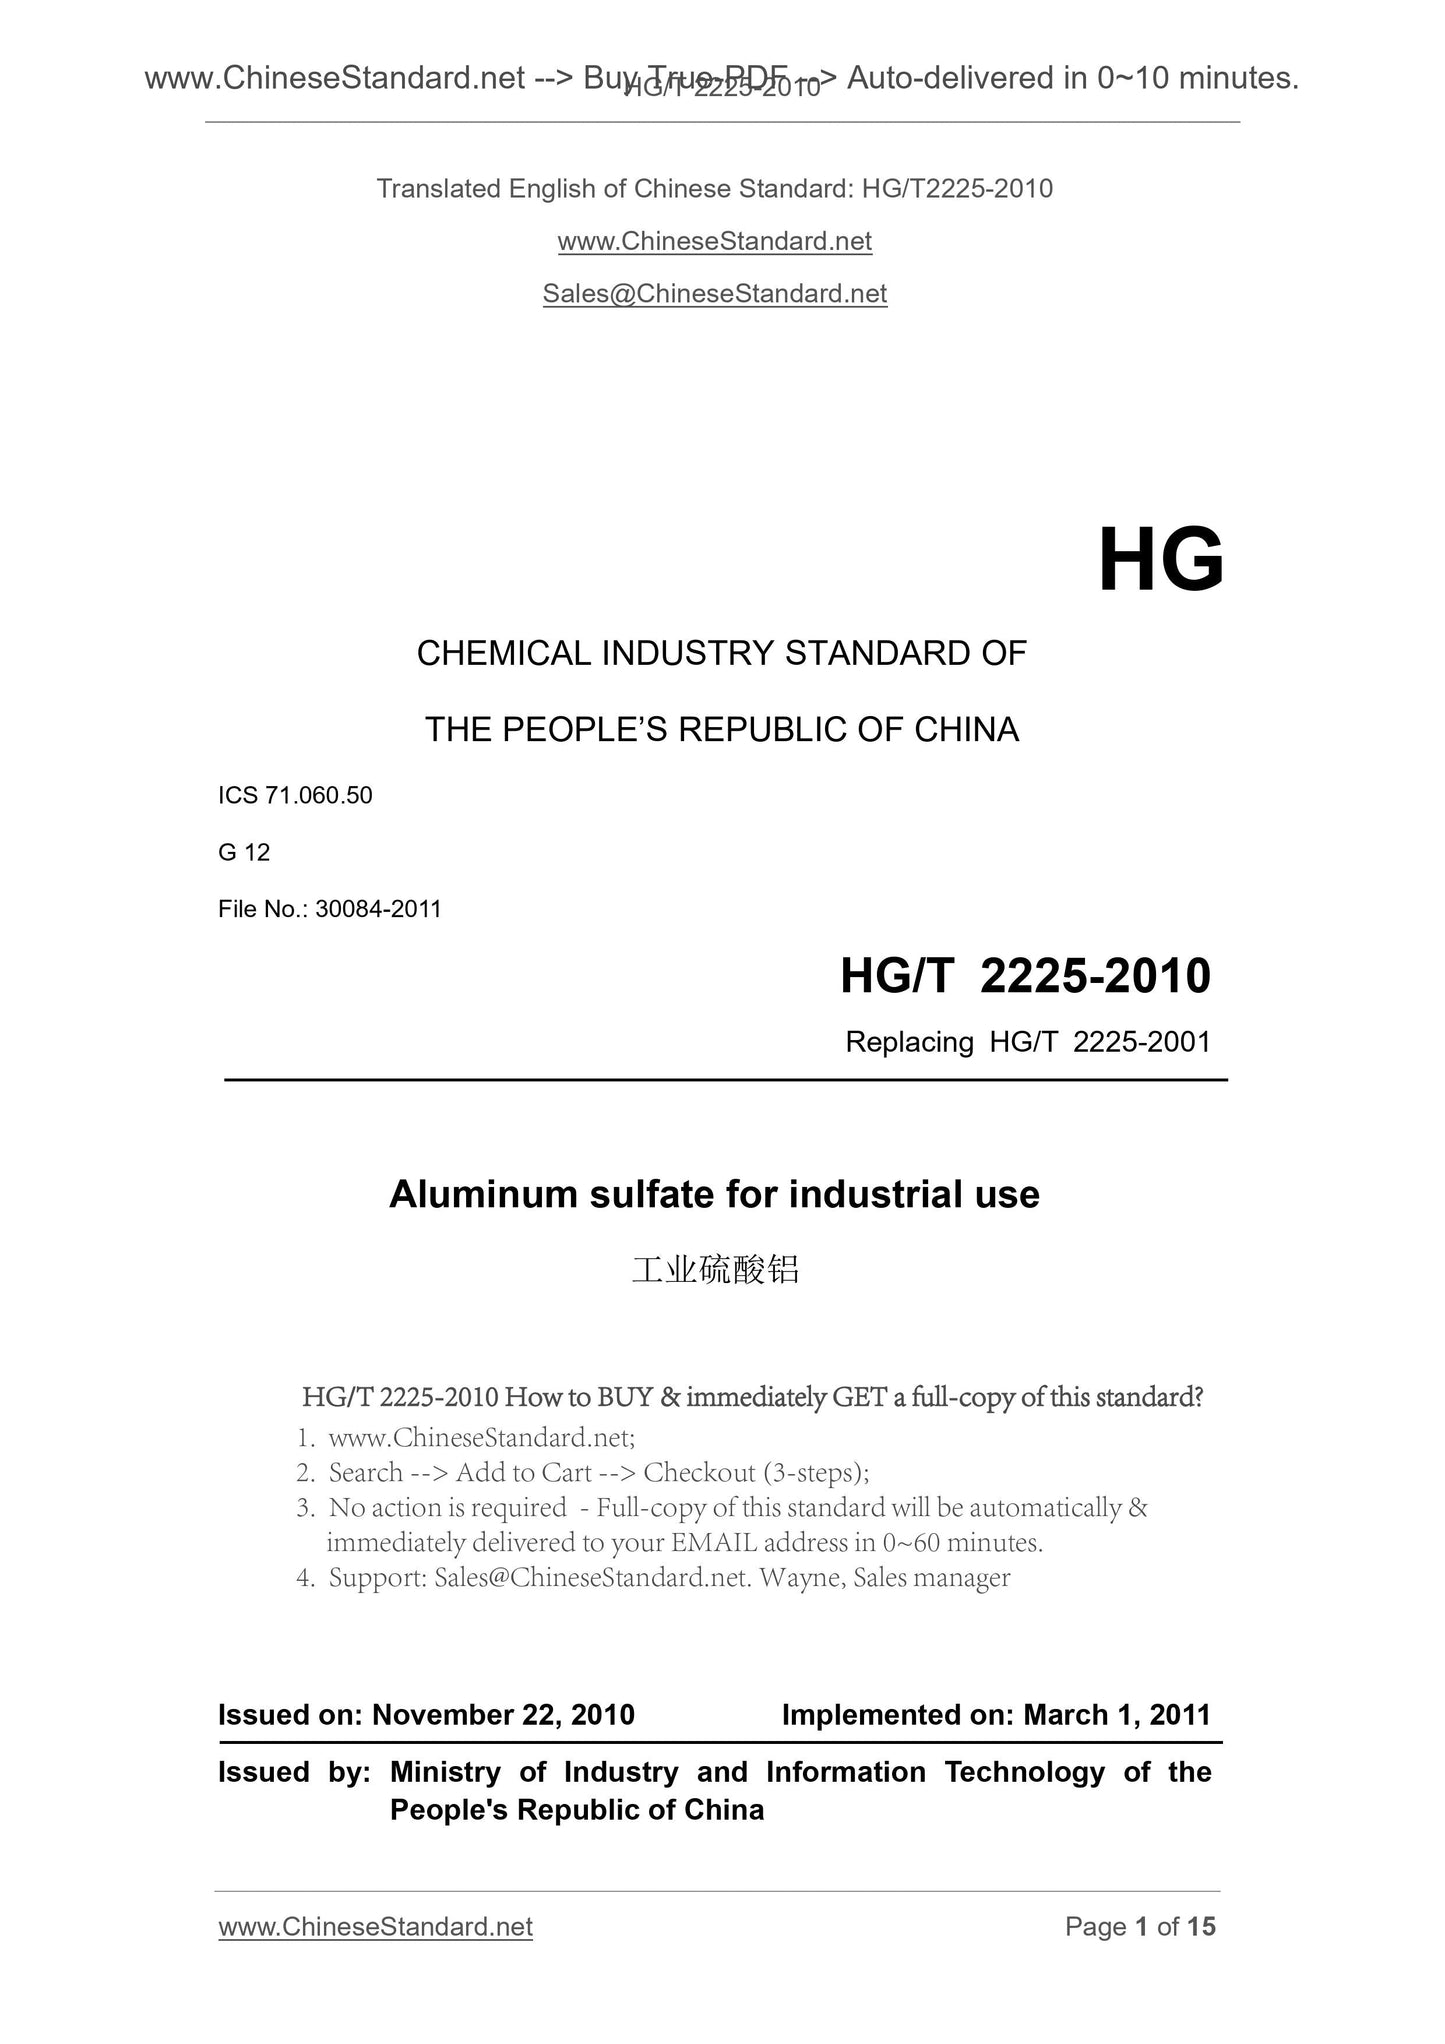 HG/T 2225-2010 Page 1